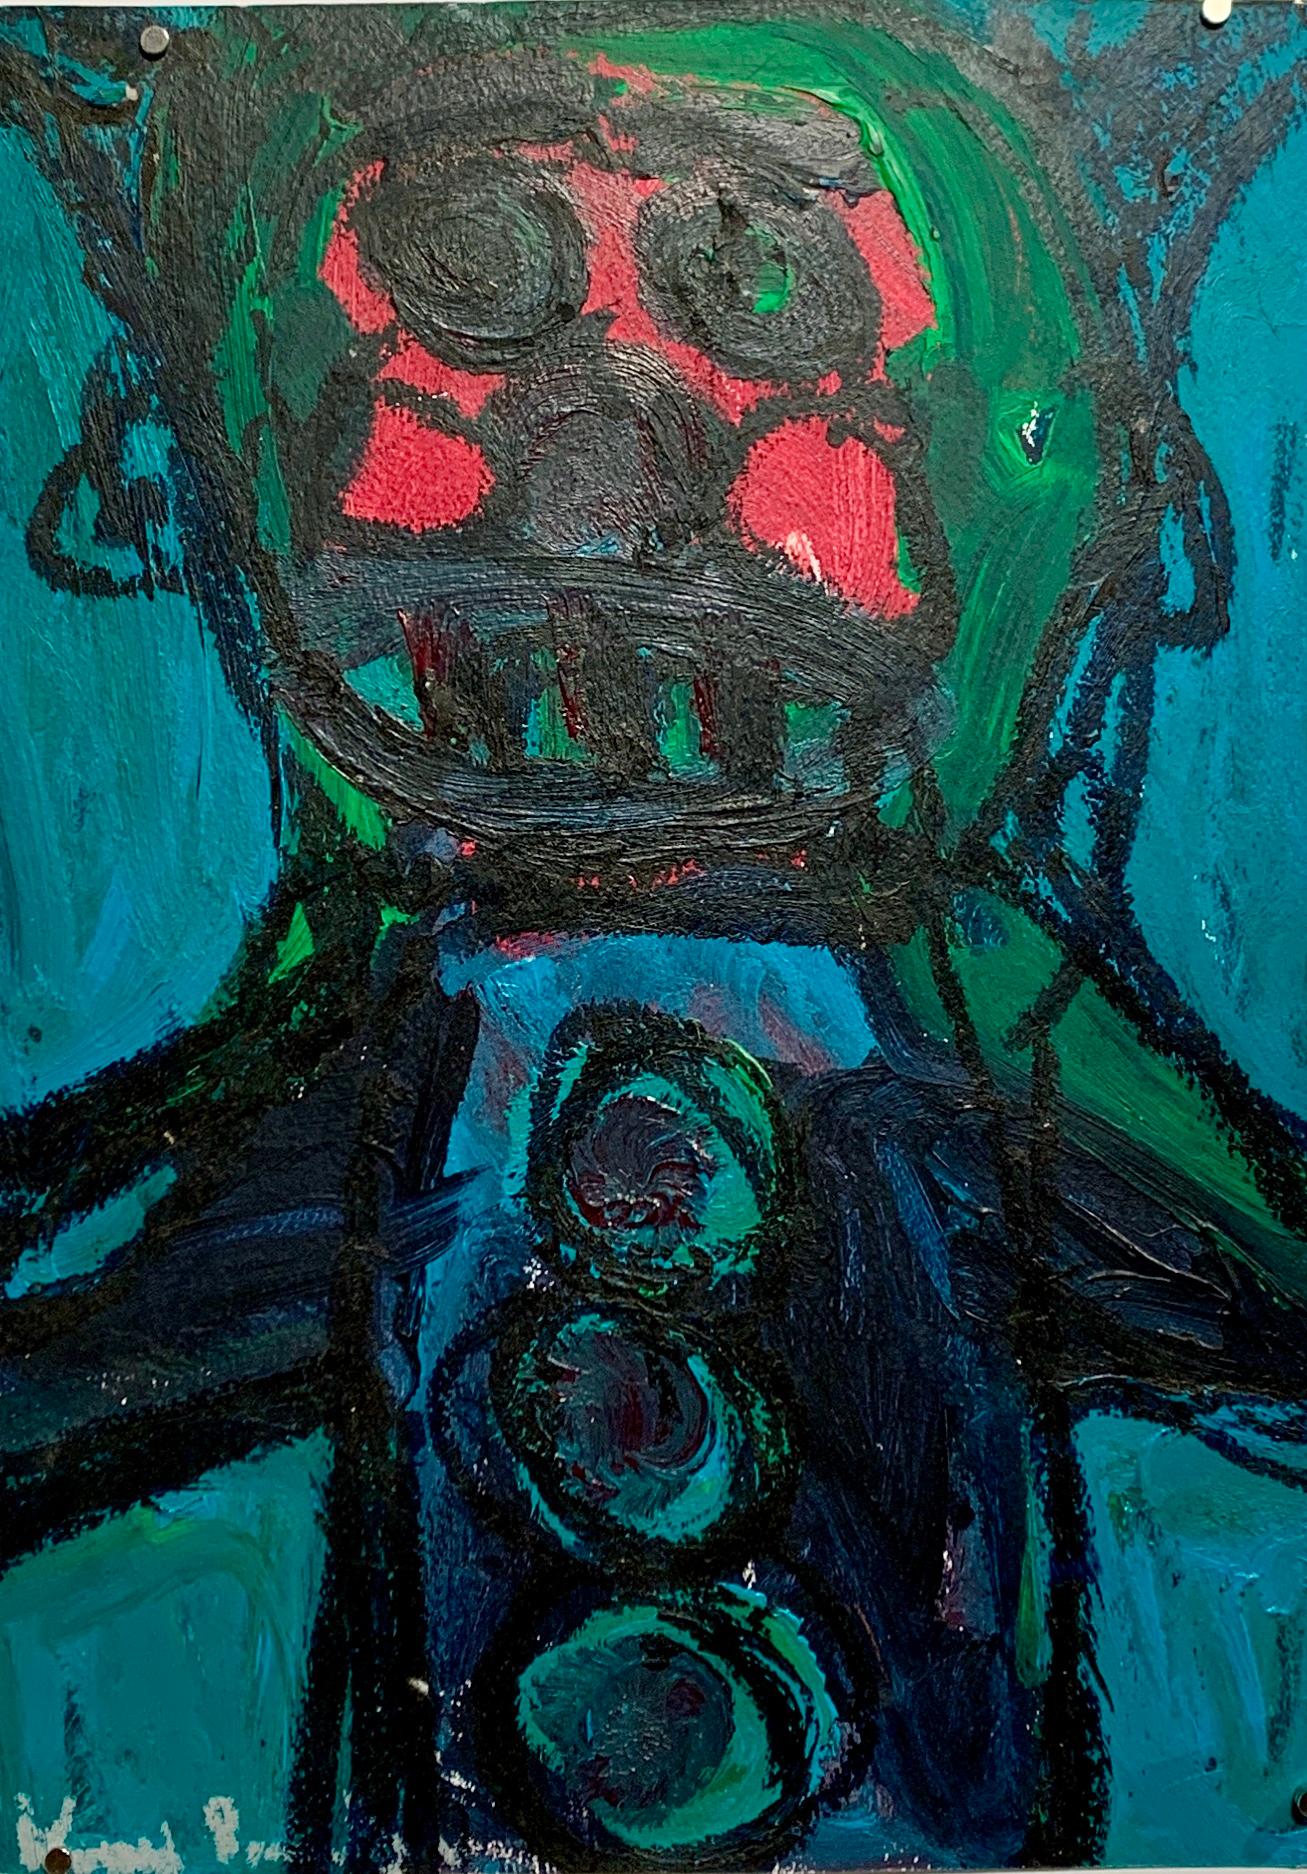 Unknown Abstract Painting - "Red Cheeks" c 2000 Outsider Artist Abstract Figure Painting